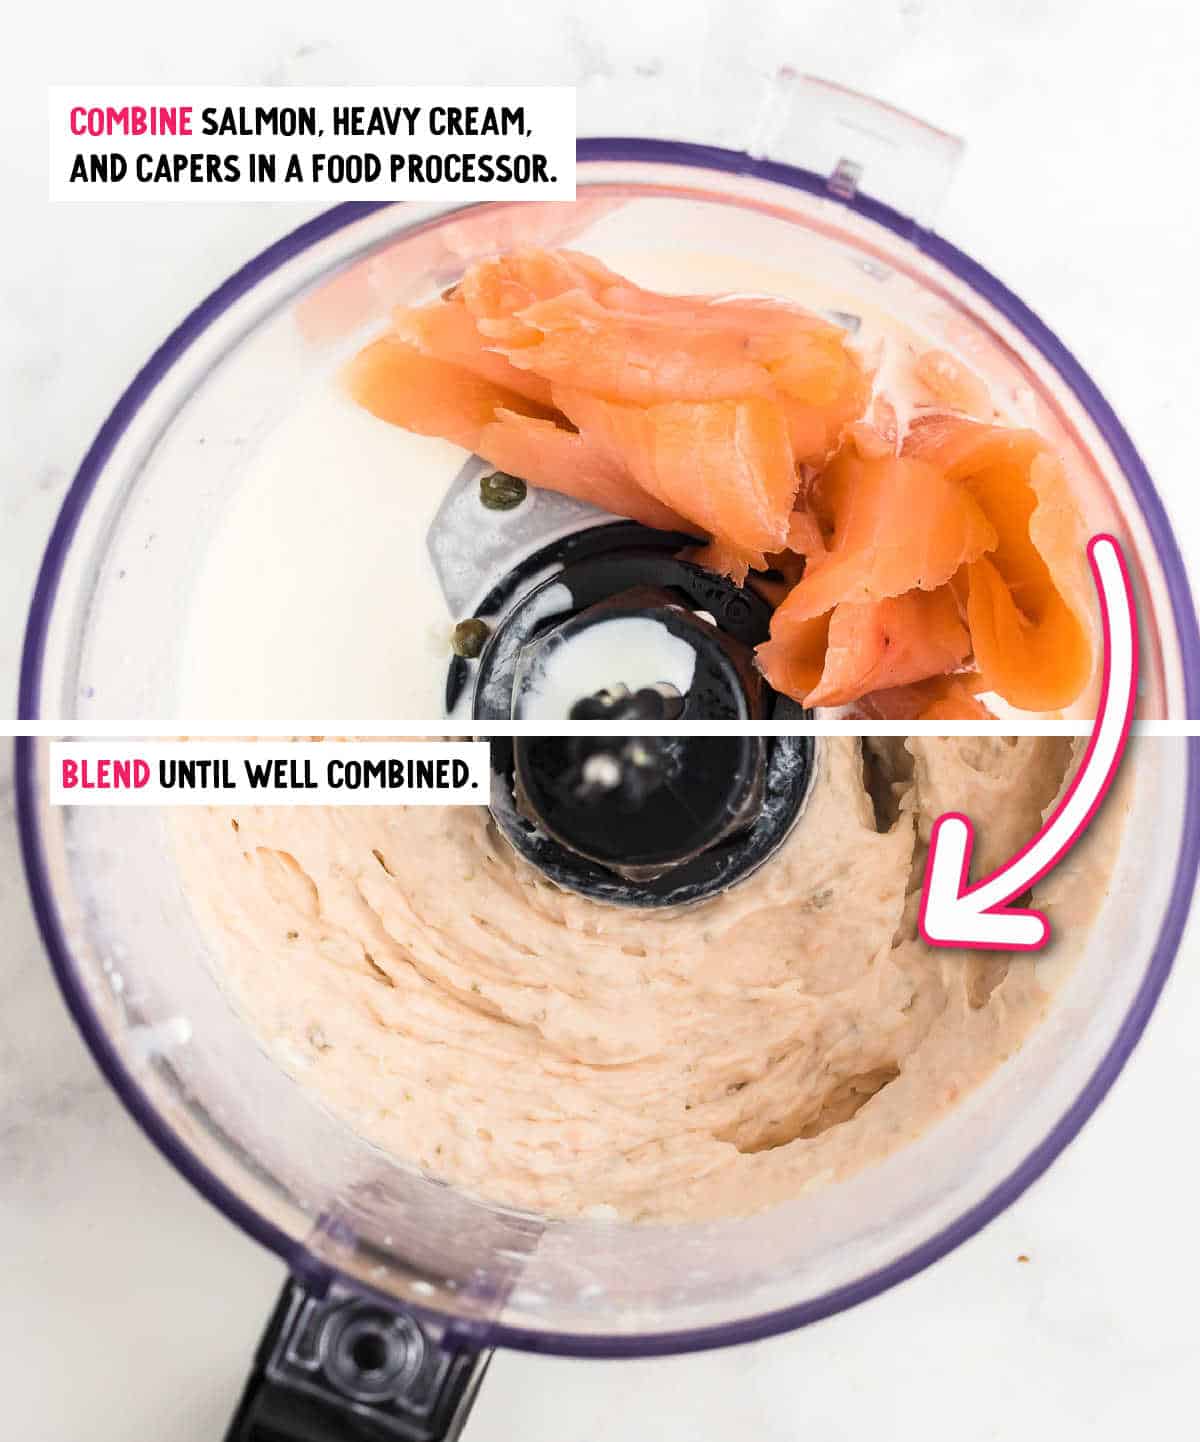 Blending the ingredients in a food processor.